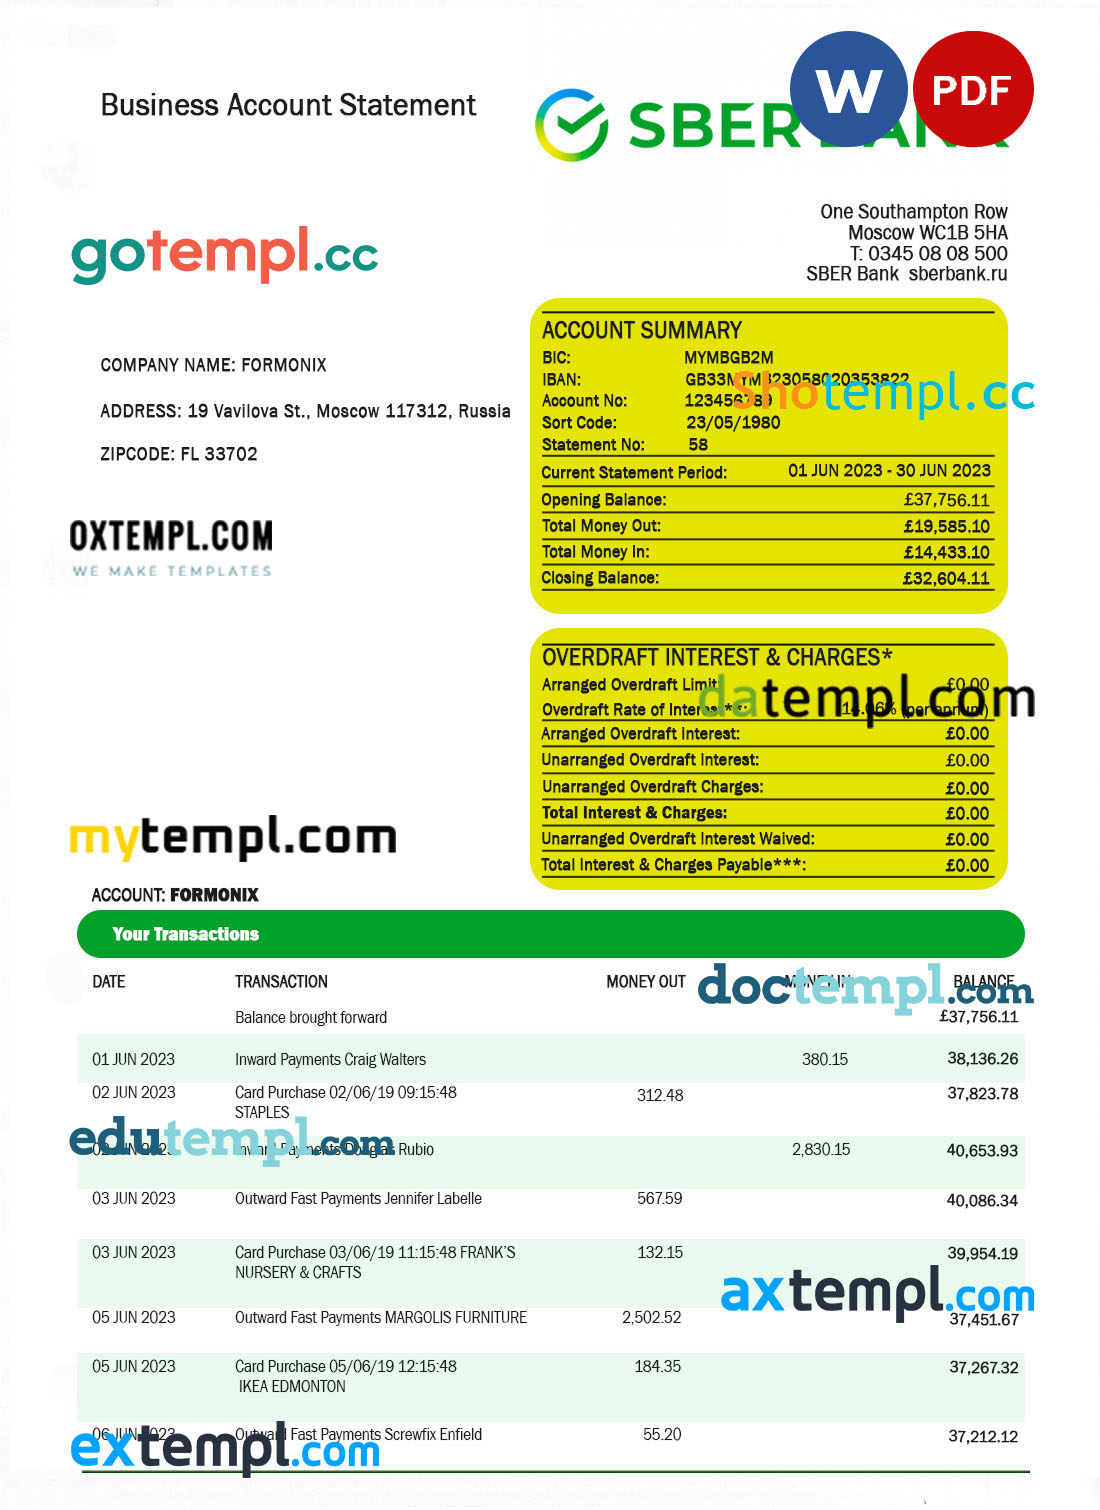 editable template, SBERBANK Bank enterprise checking account statement Word and PDF template